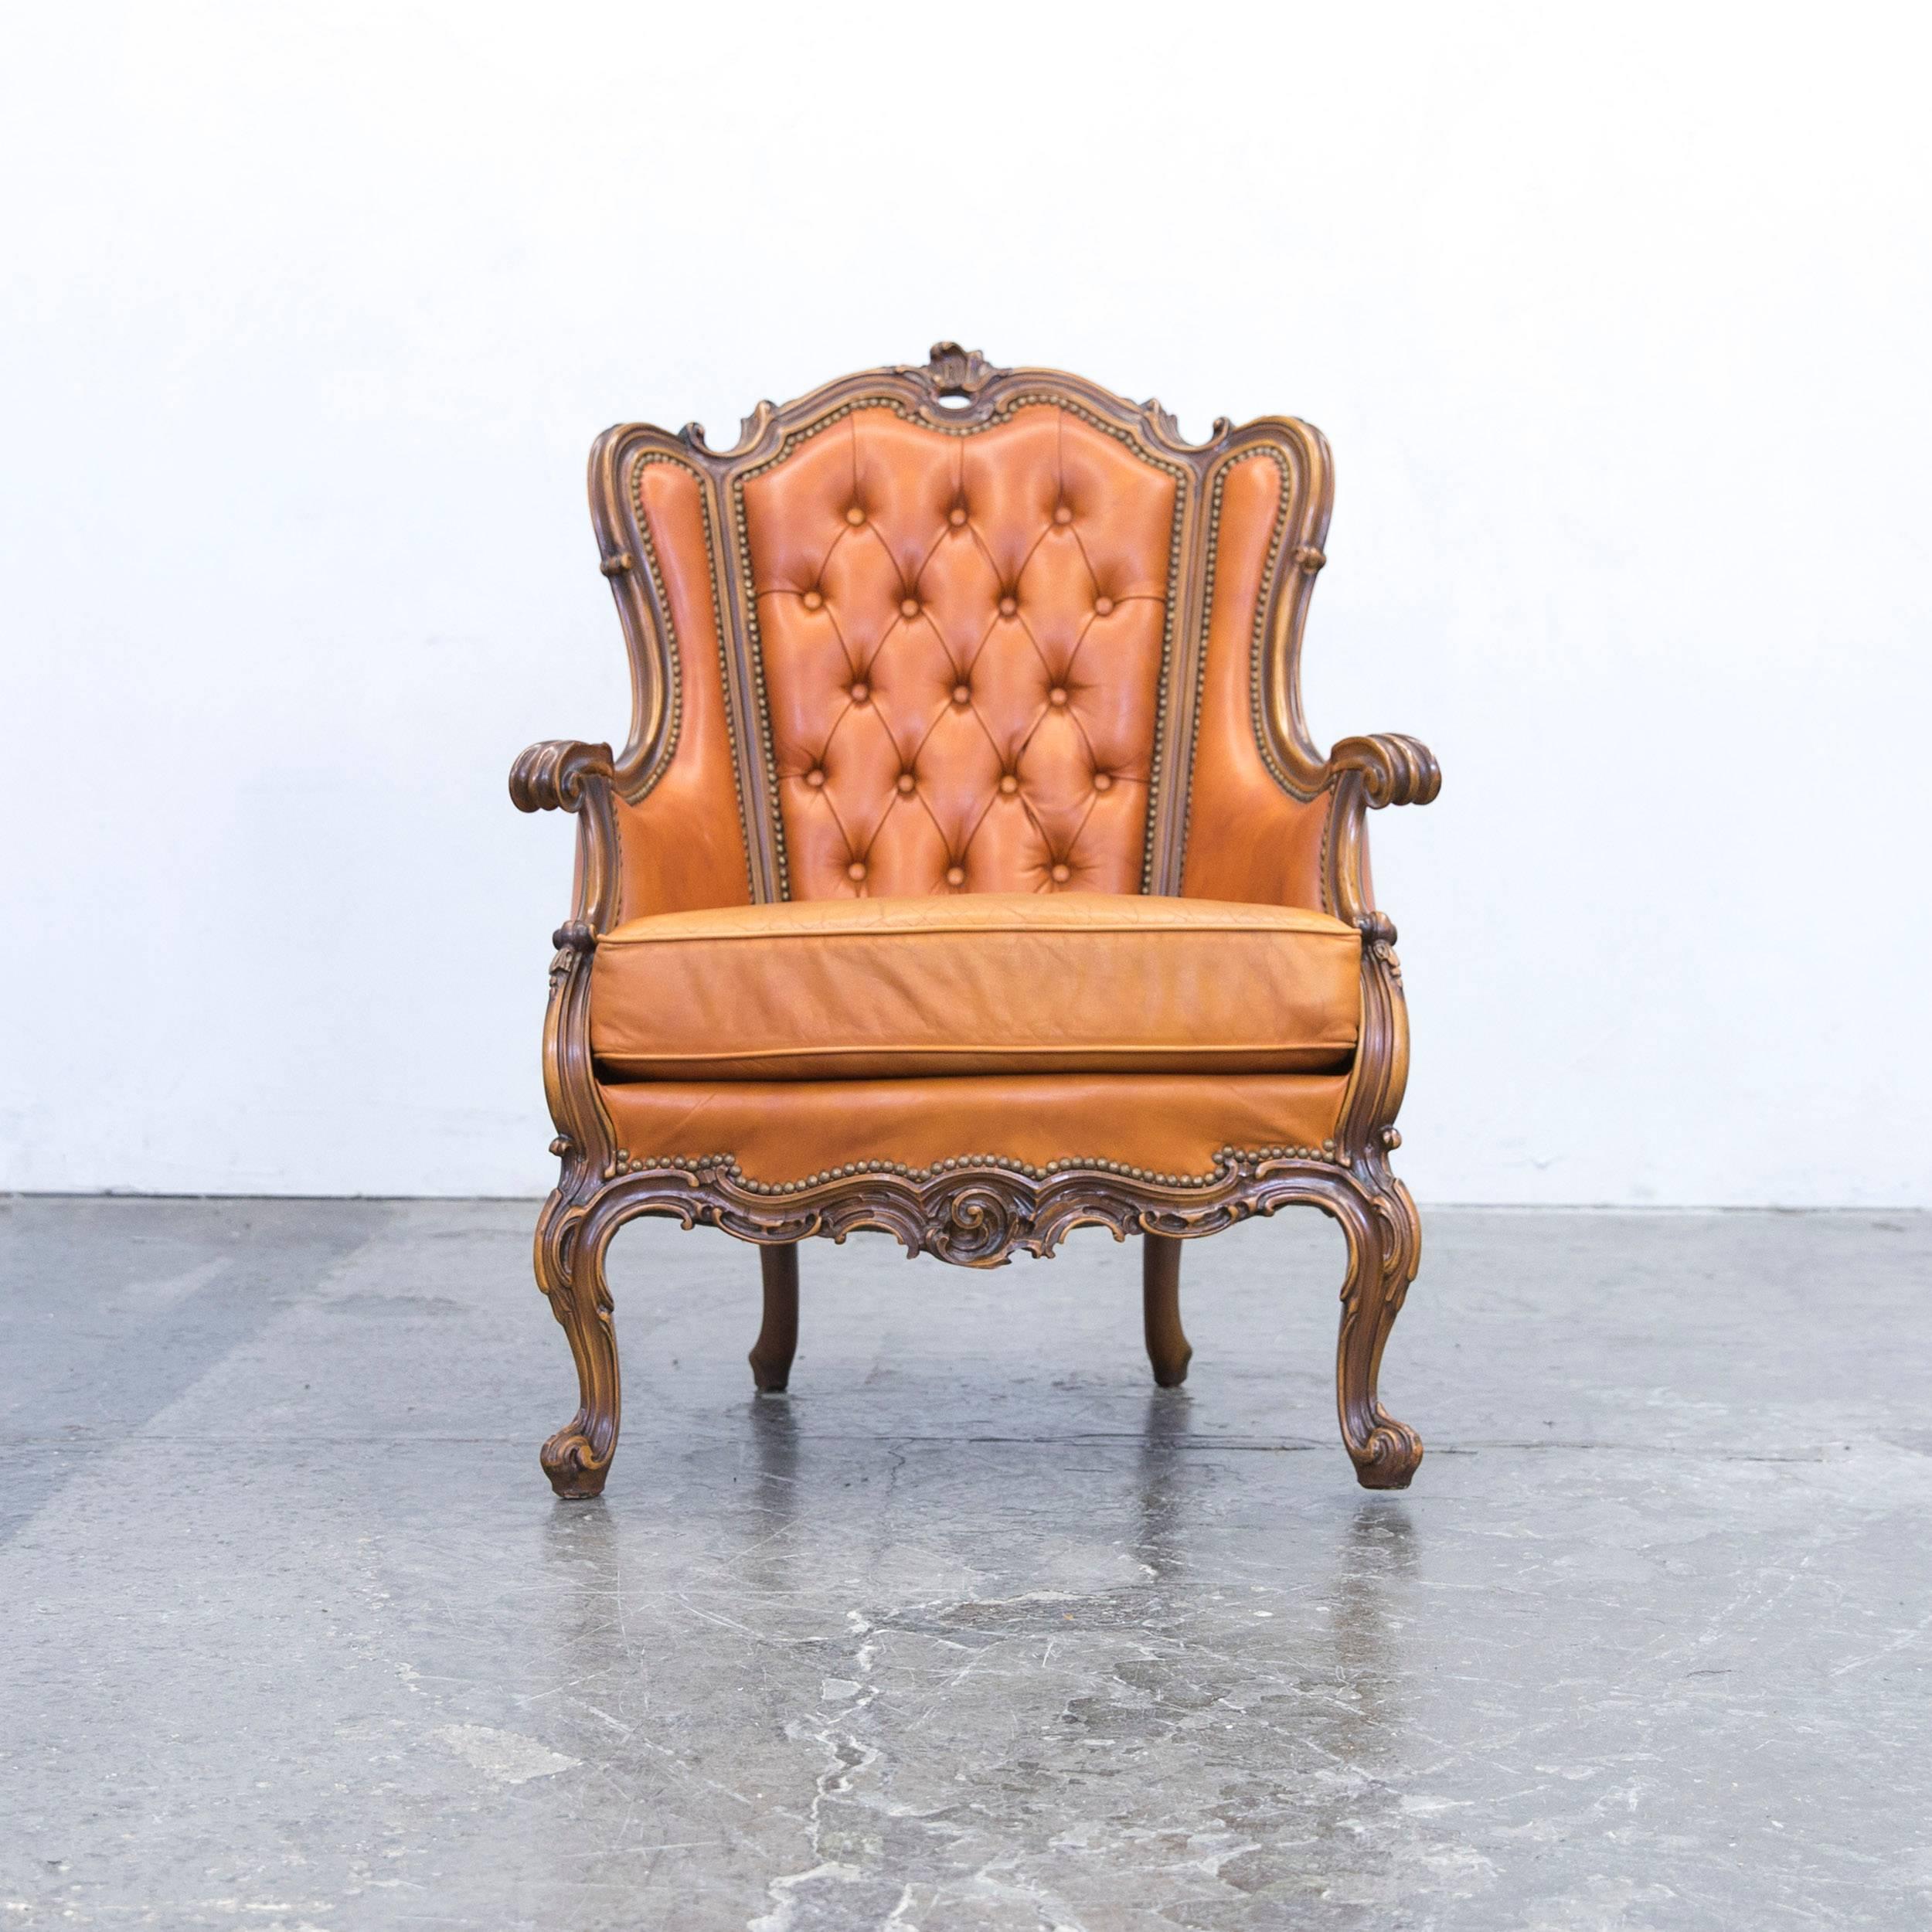 Cognac brown colored original Chesterfield leather armchair in a vintage design, made for pure comfort and elegance.